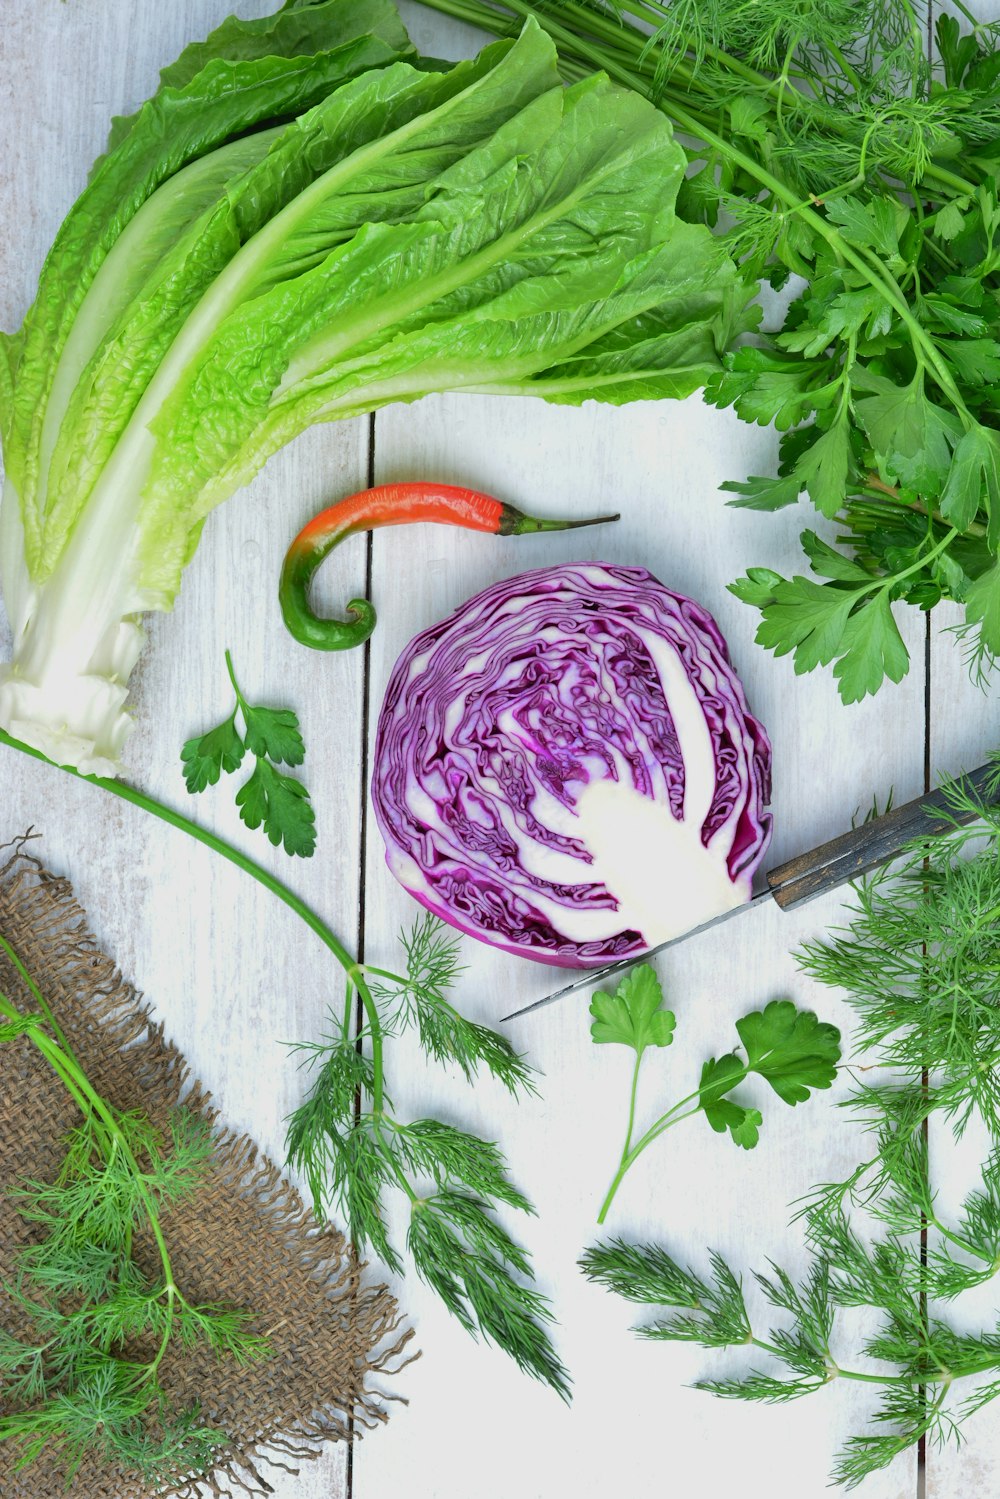 green and purple vegetable on white textile